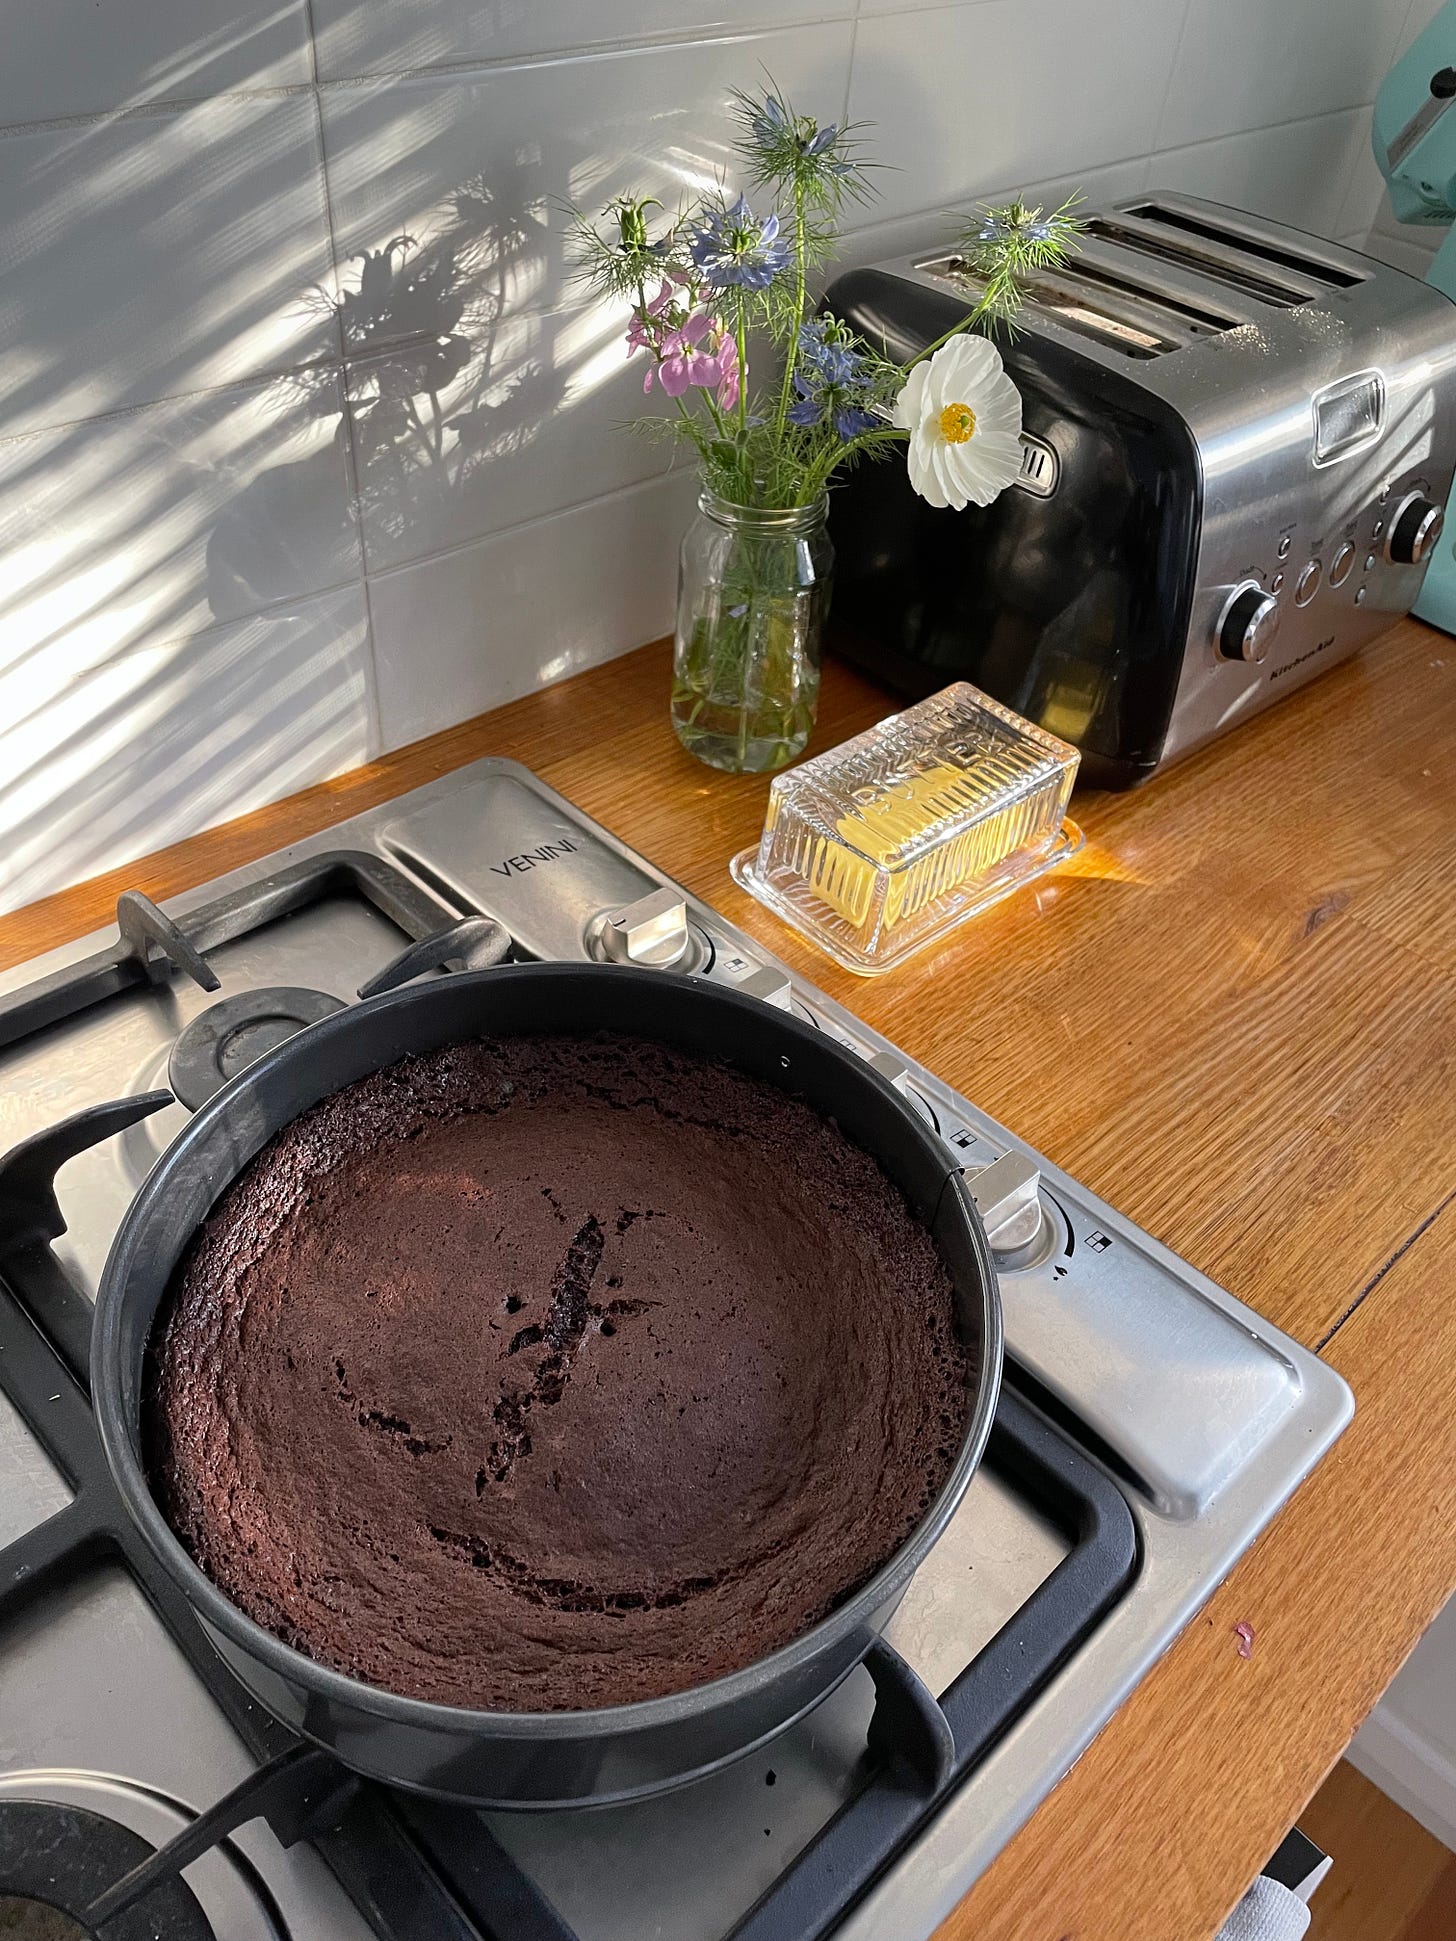 Dark chocolate cake cooling on the stove in a spring form tin. It's lit by sunlight, a posy of flowers, toaster and butter dish on the kitchen counter.